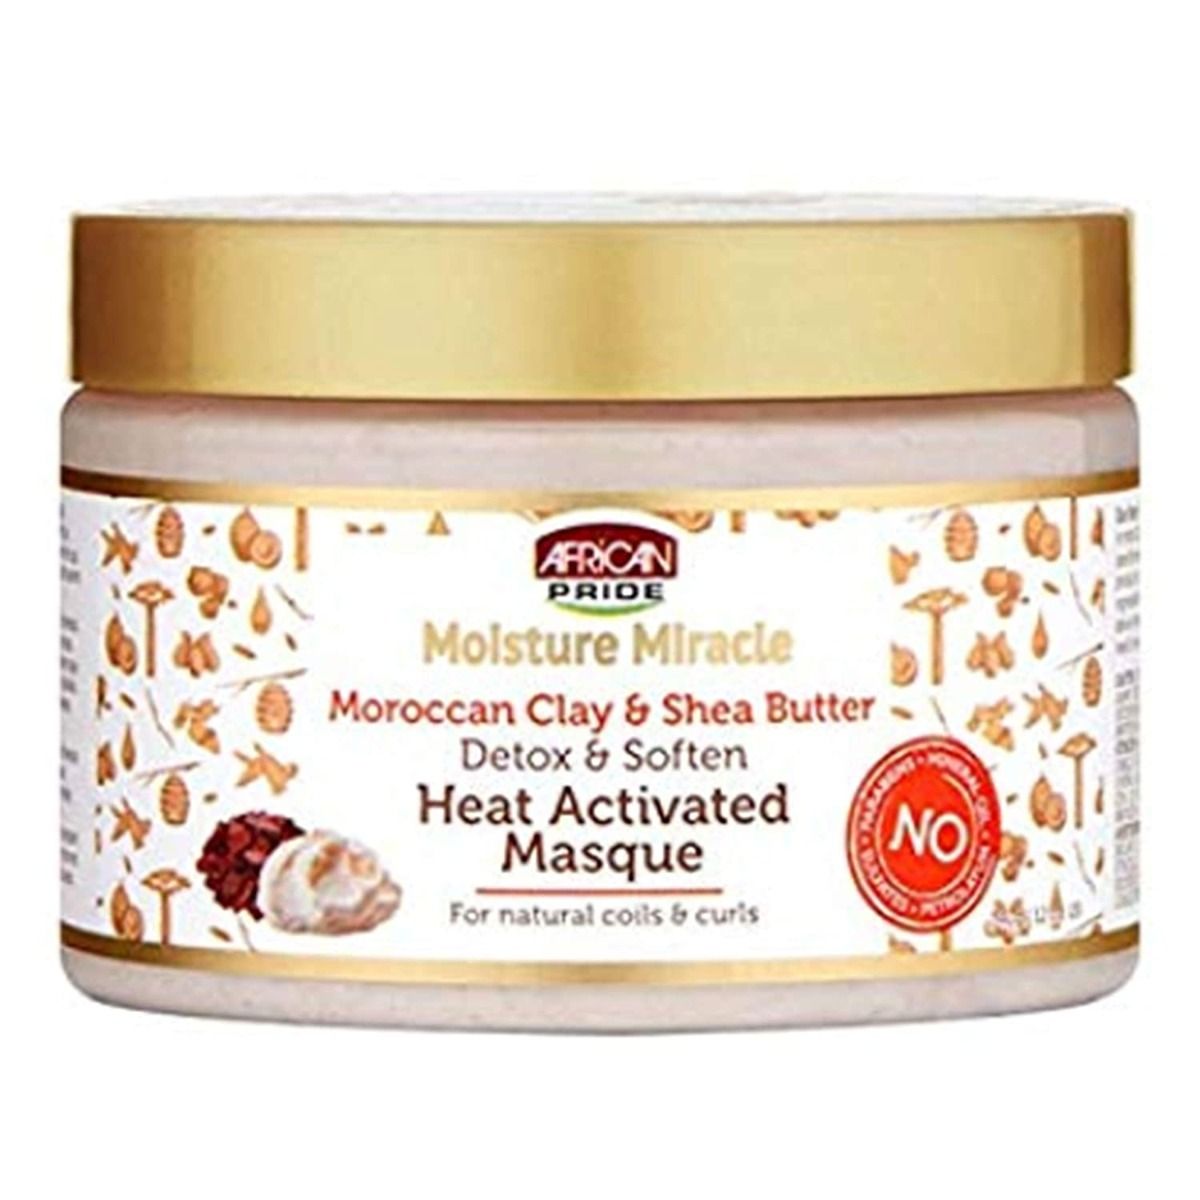 African Pride Moisture Miracle Moroccan Clay & Shea Butter Masque